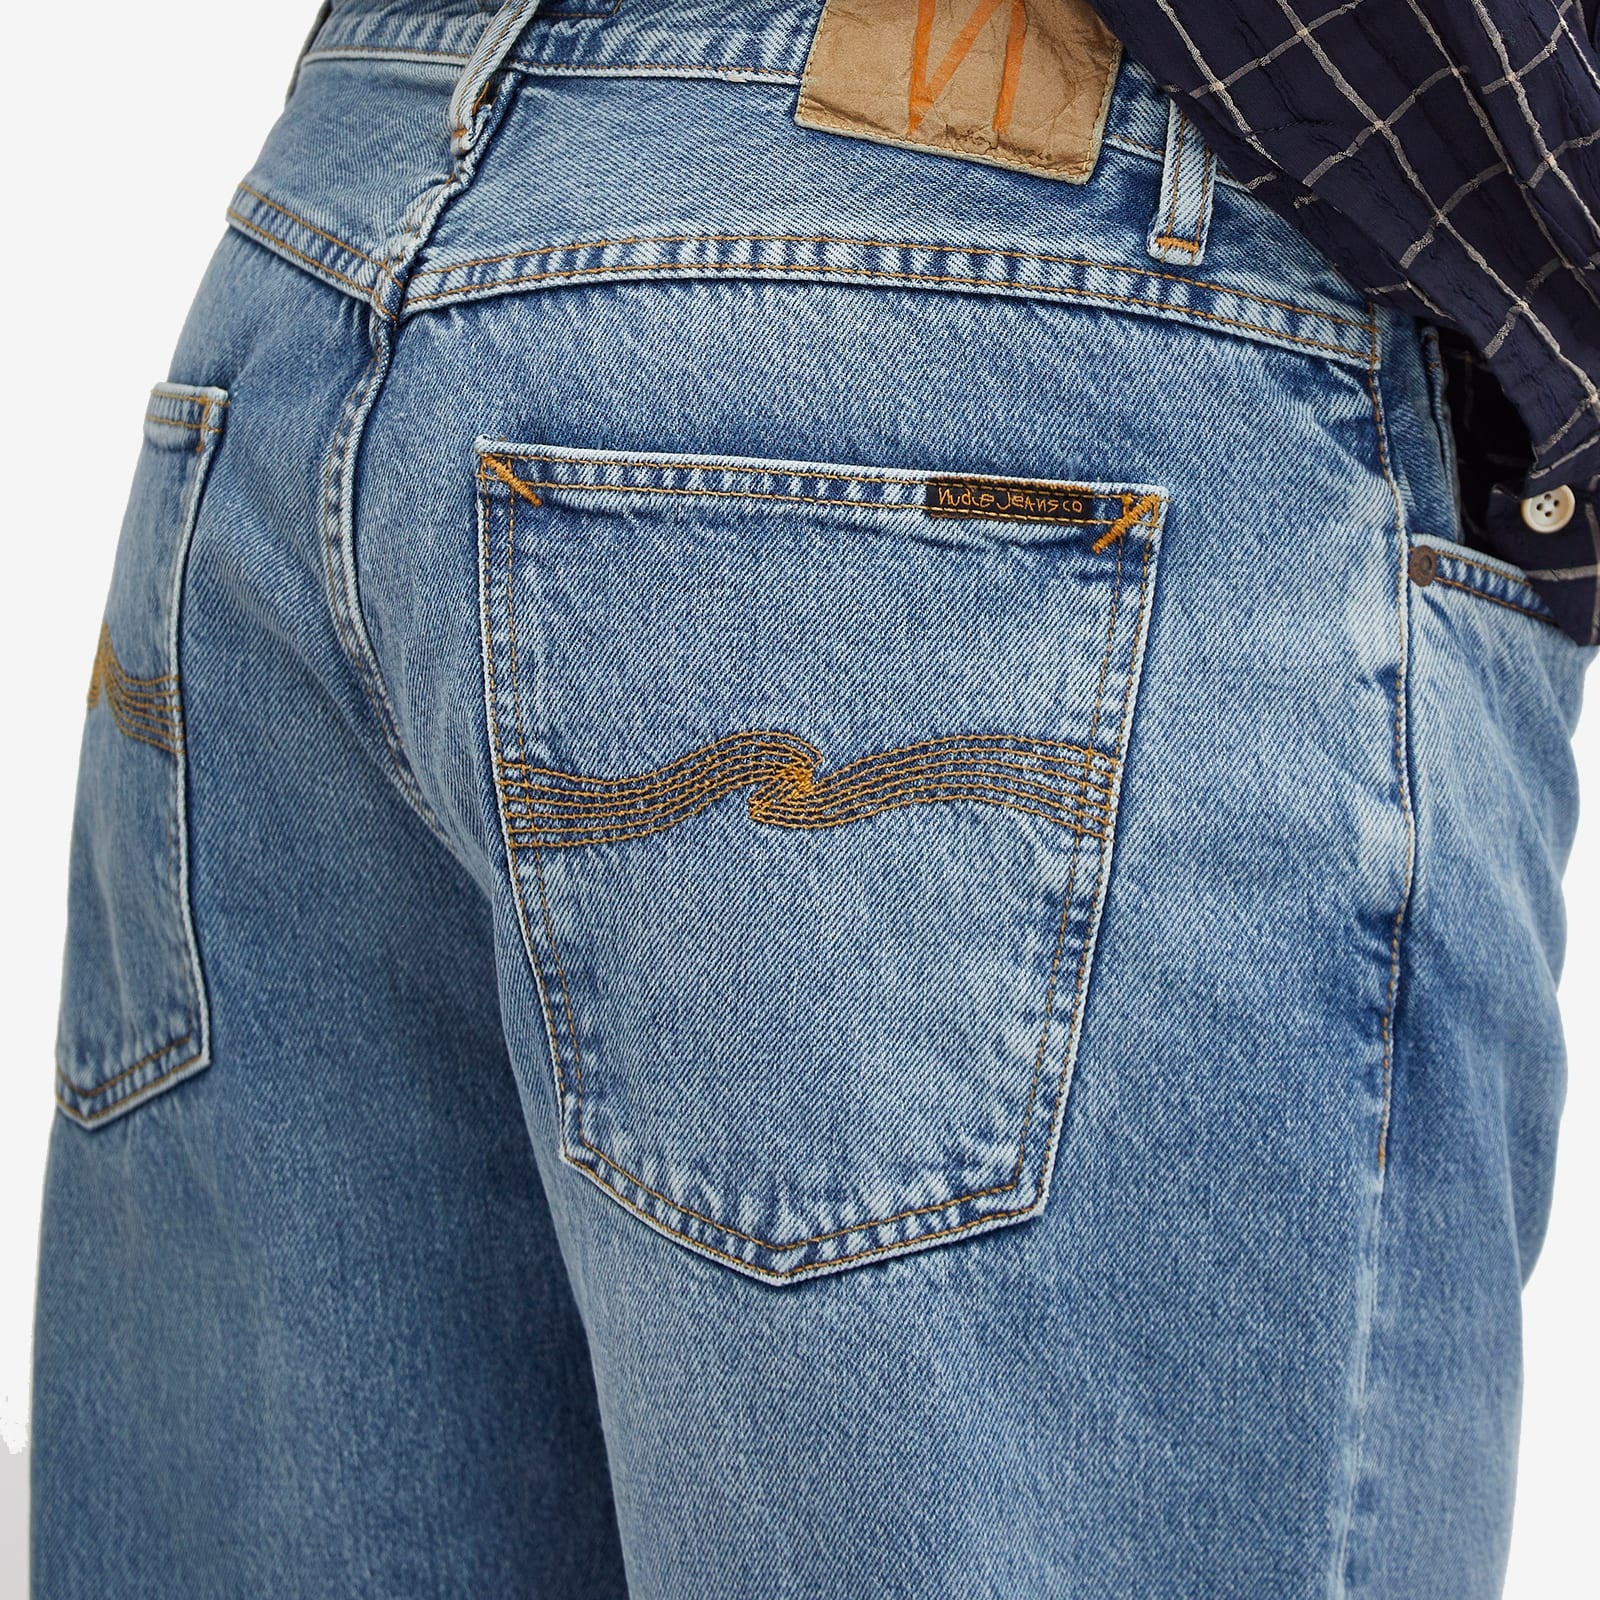 Nudie Jeans Co Tuff Tony Jeans - 5